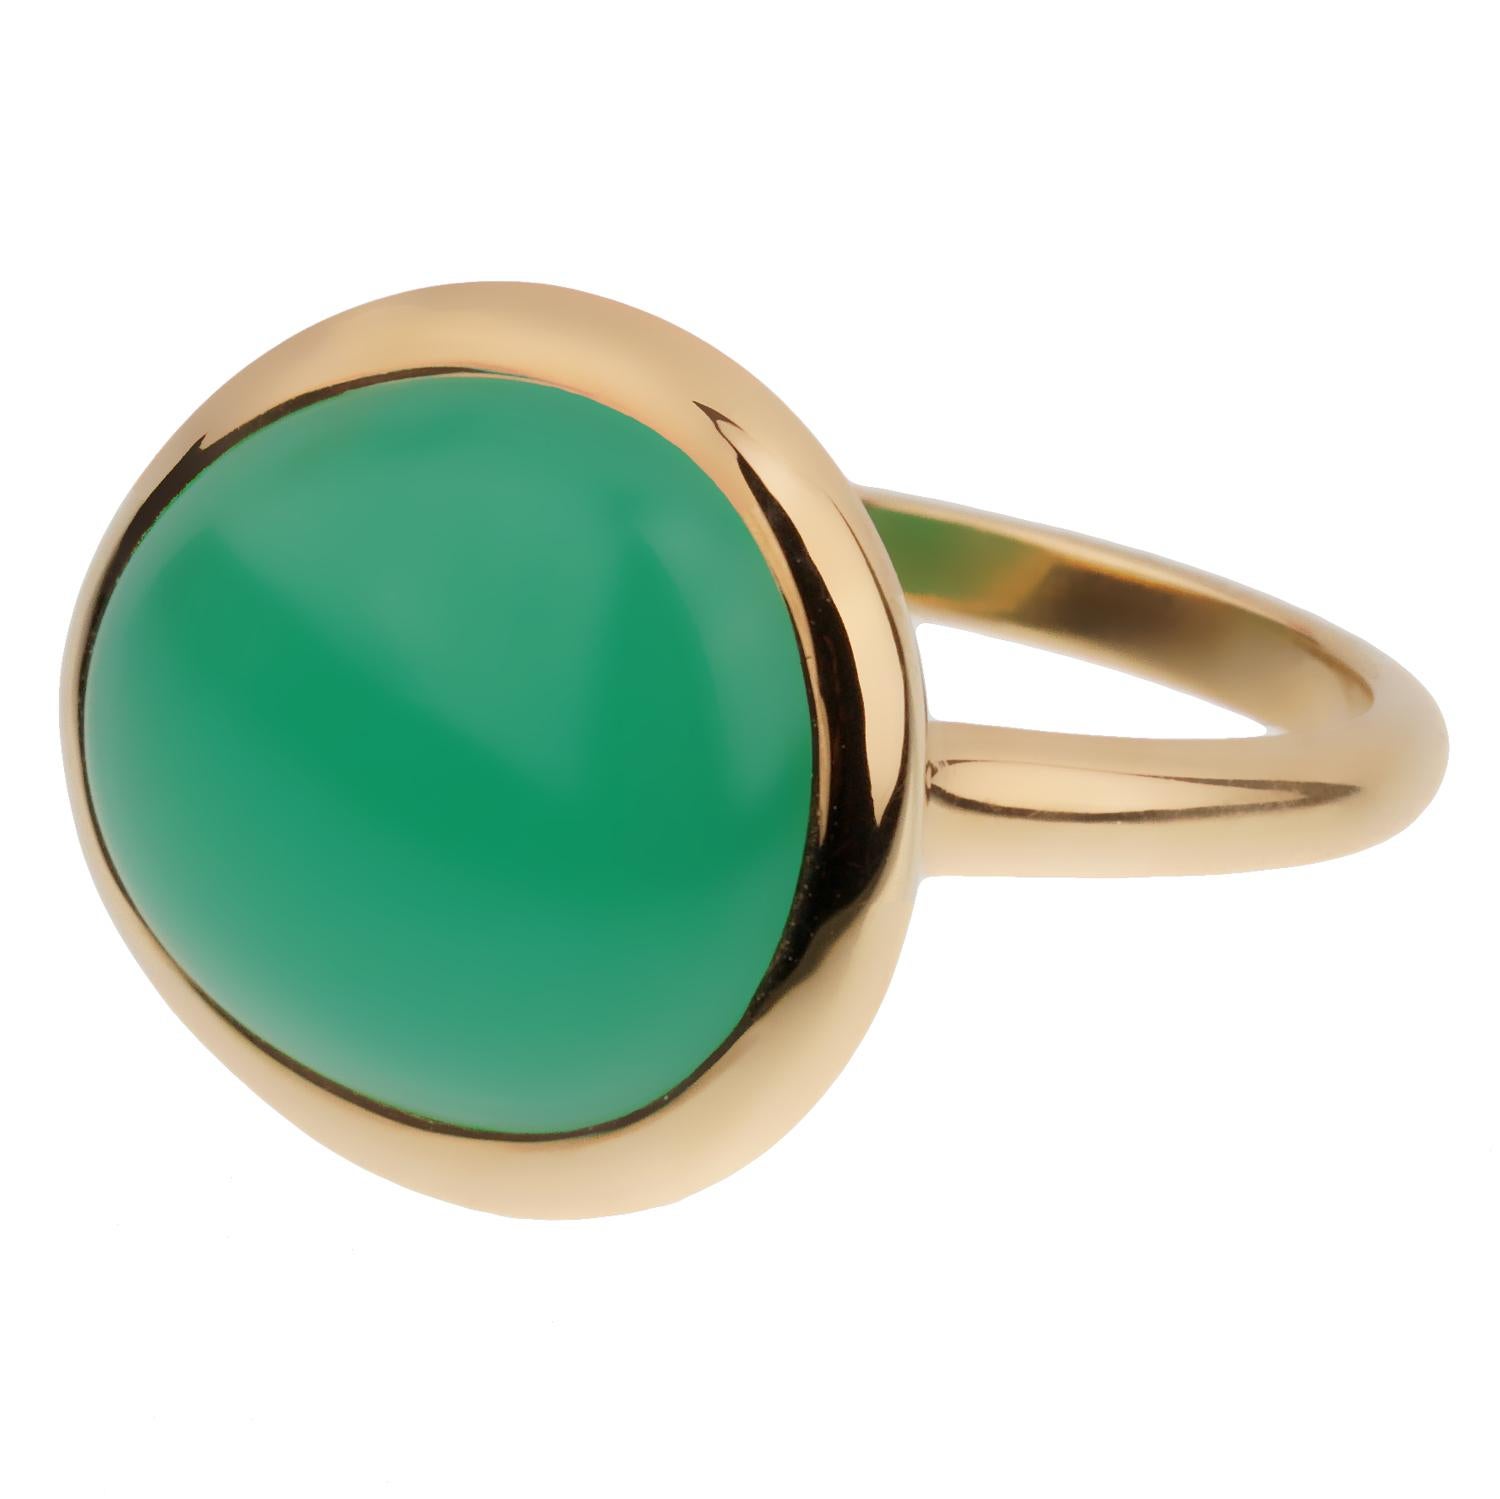 A chic Fred of Paris yellow gold cocktail ring showcasing a 7ct cabochon Chrysophase set in 18k gold. The ring measures a size 6 and can be resized if needed.